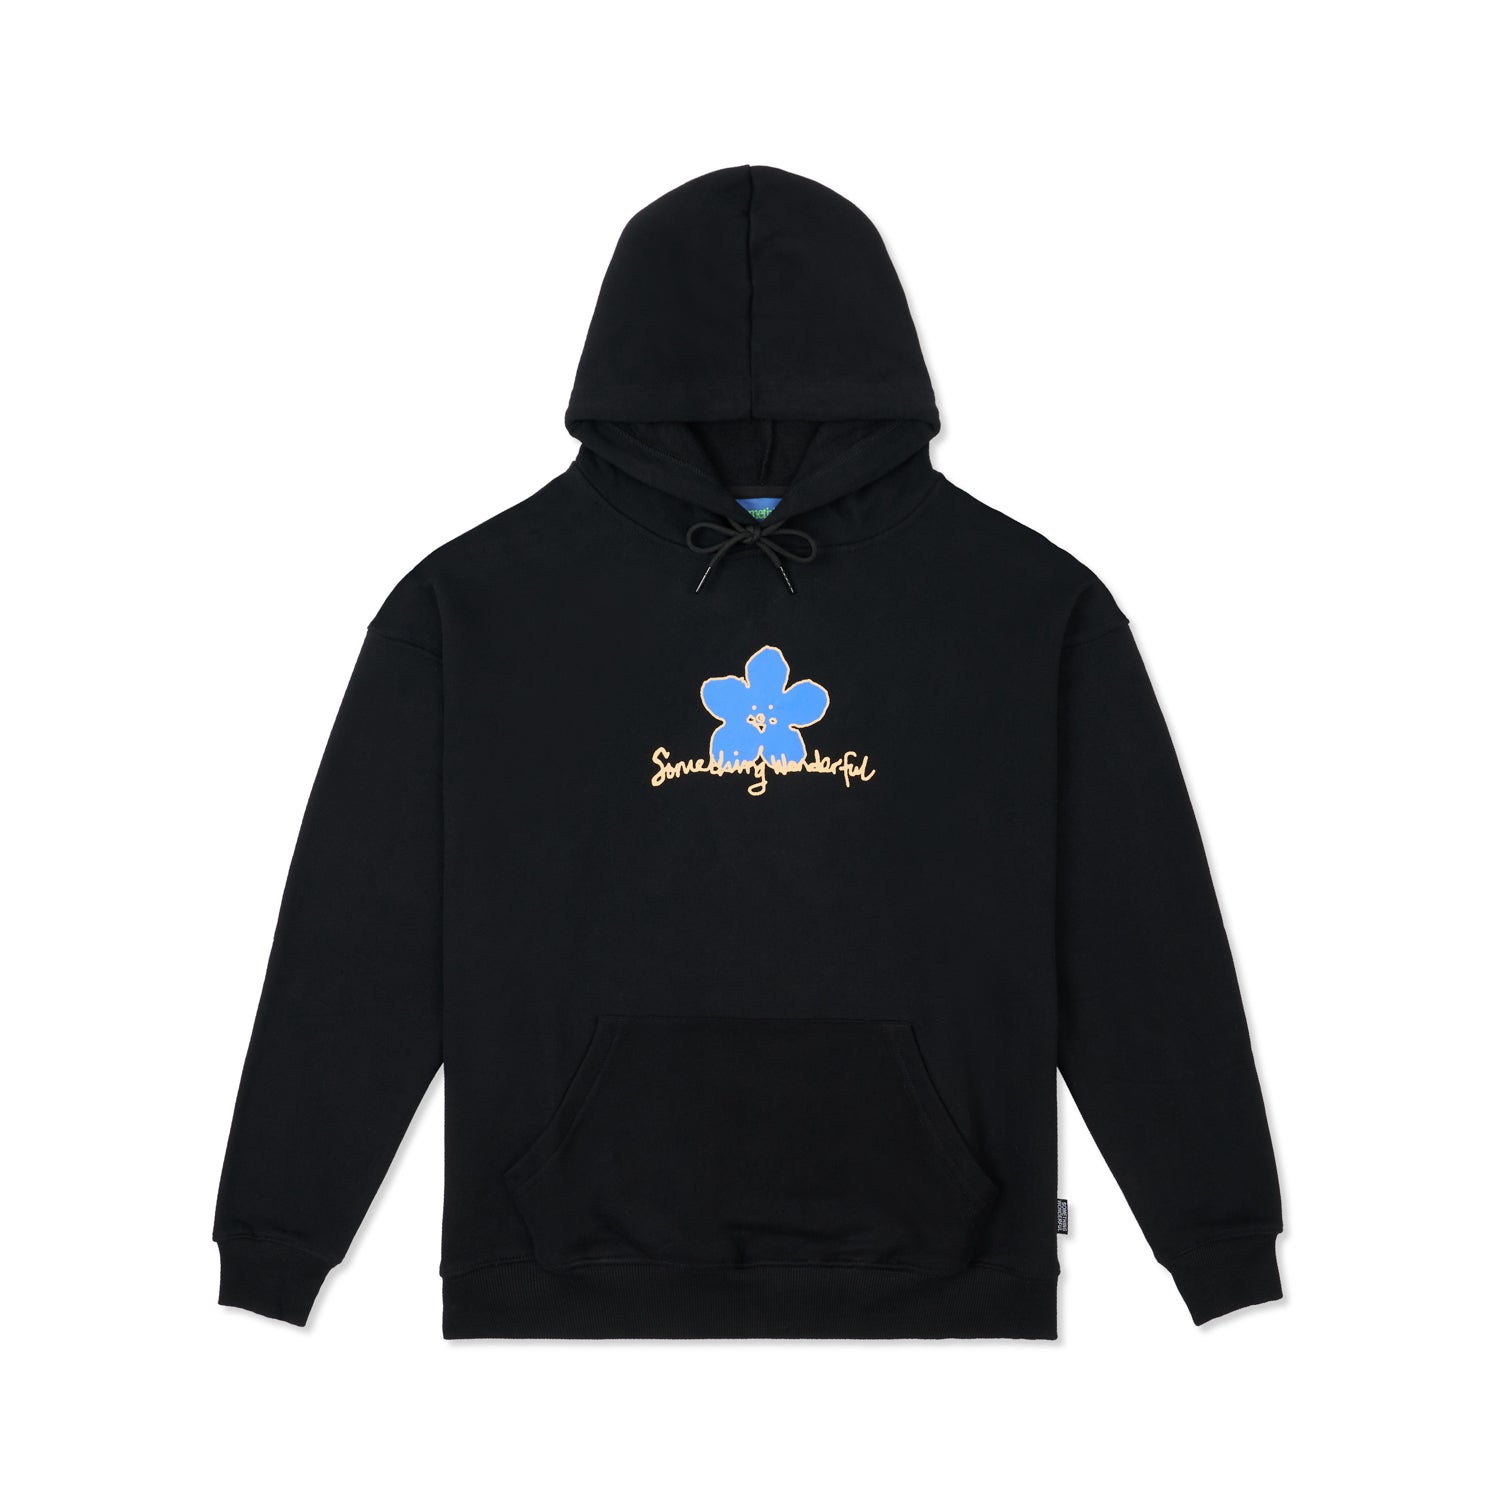 Black hoody with blue and yellow logo